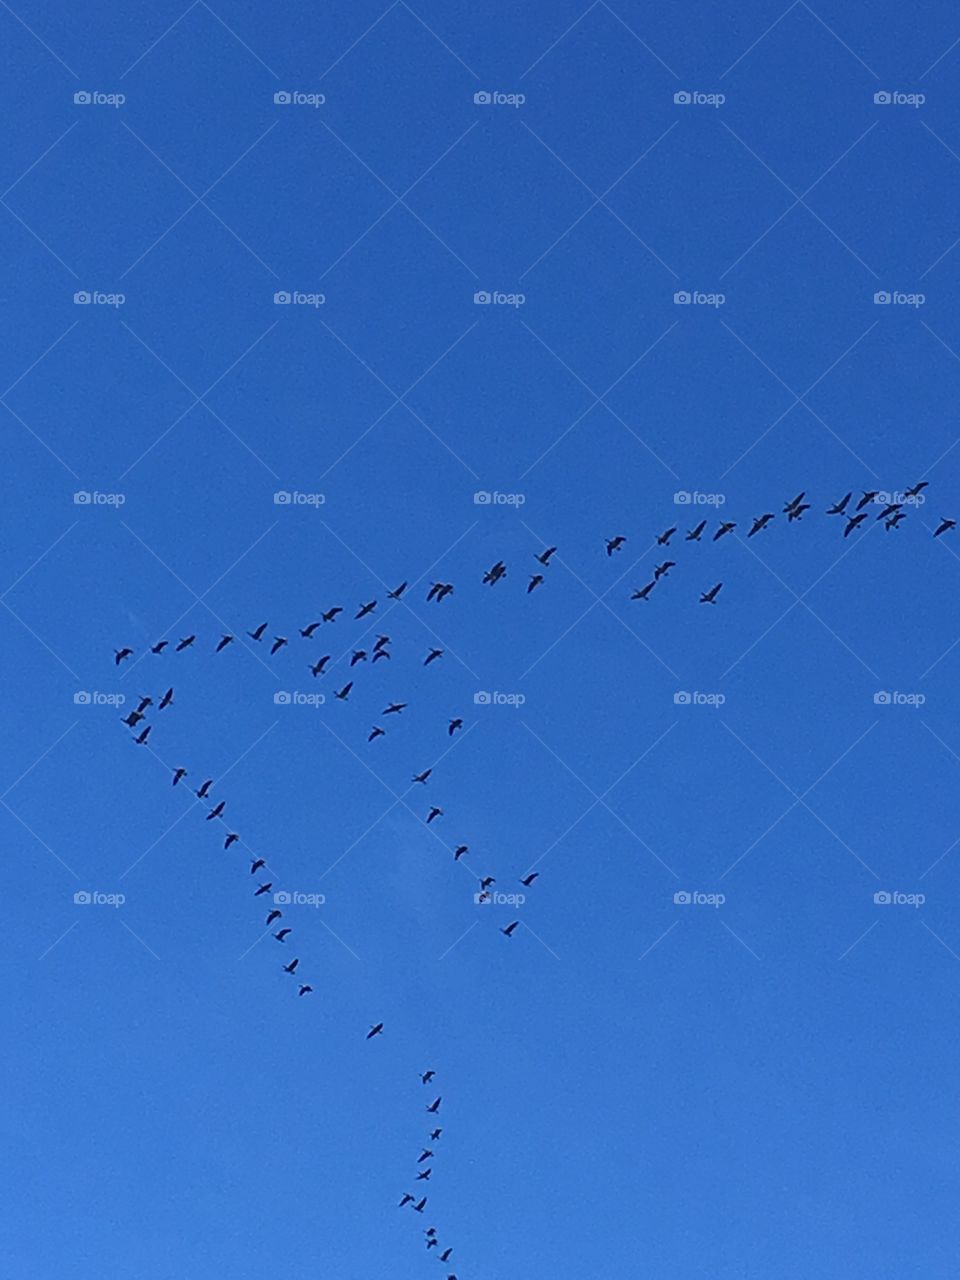 Geese going home to the south